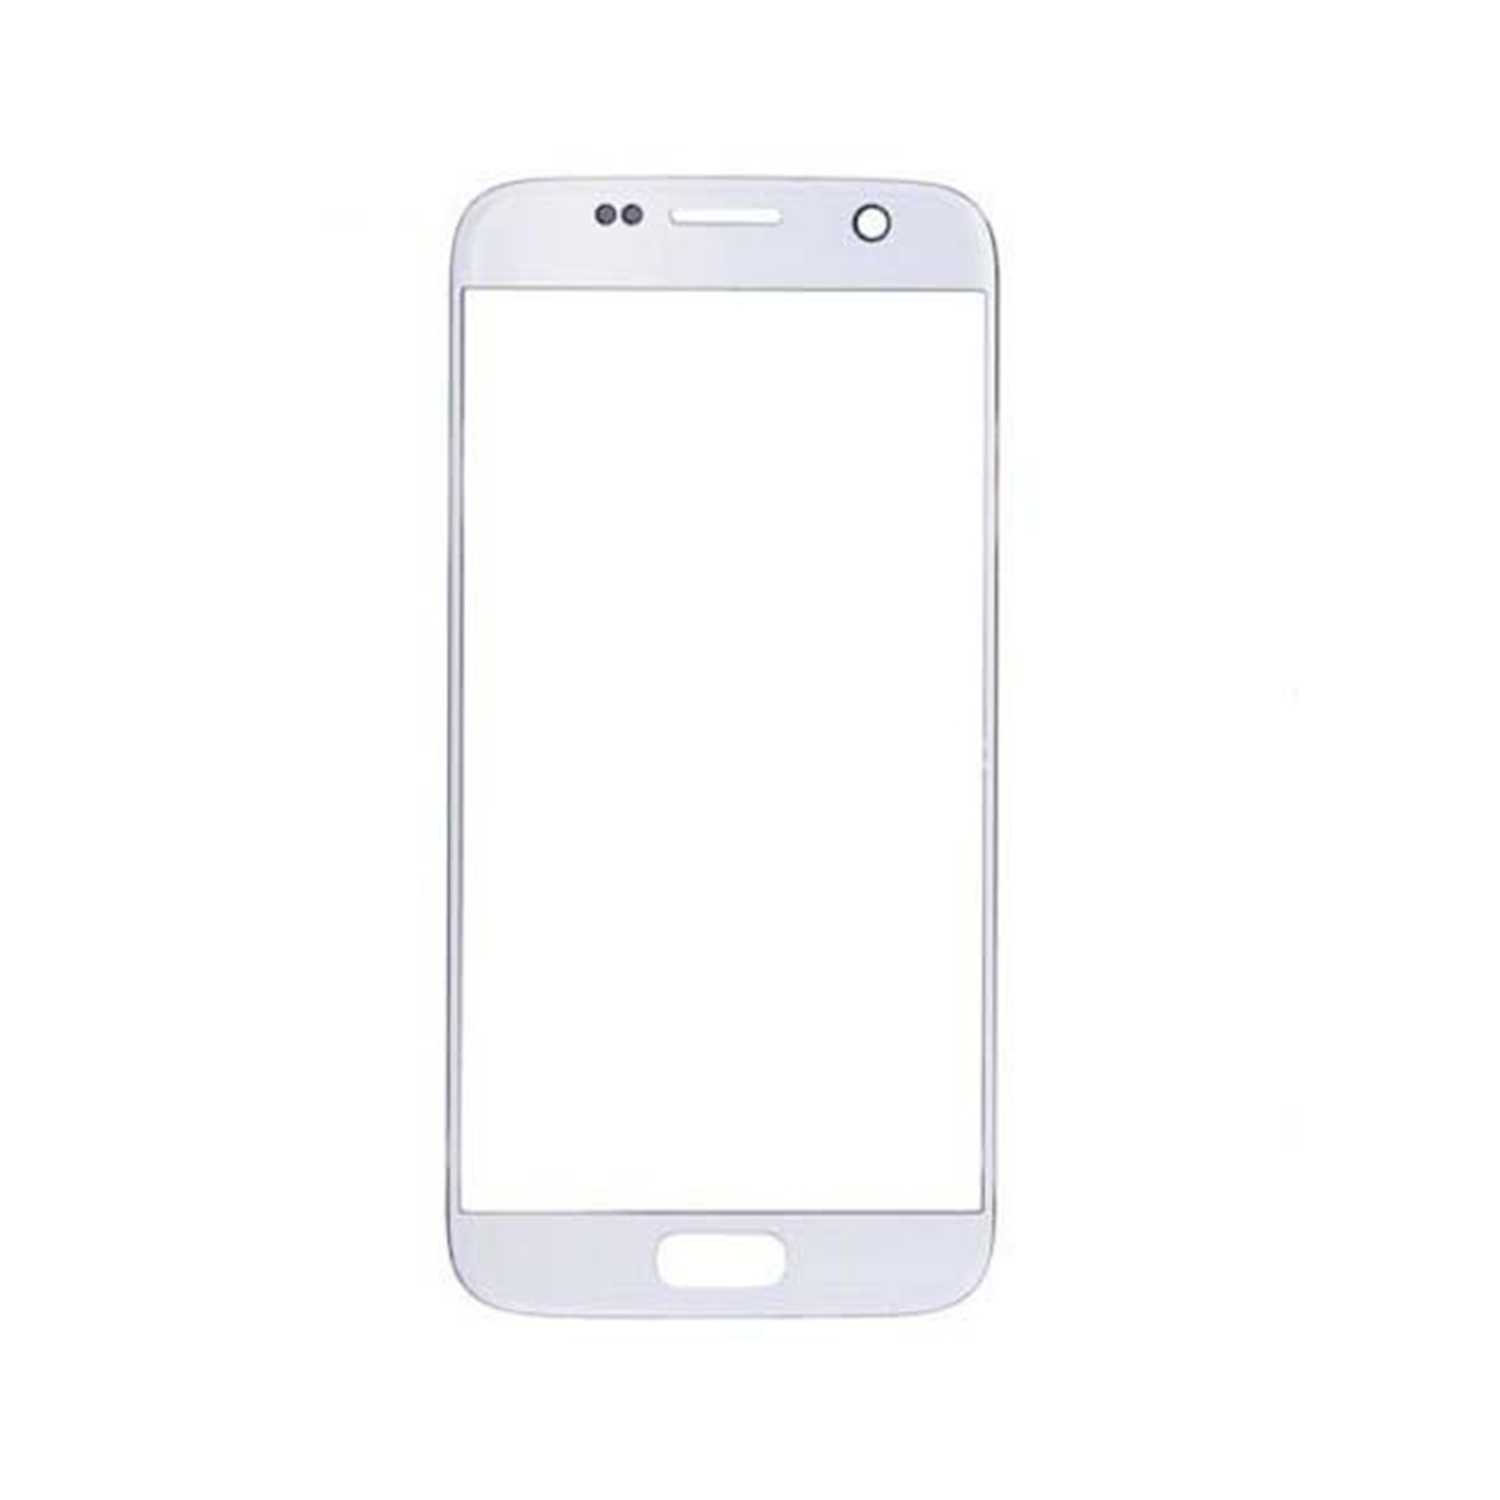 Samsung Galaxy S7 Edge G935/G935F/G935A/G935V/G935P/G935T/G935R4/G935W8 Top Glass Upper Glass Replacement - White